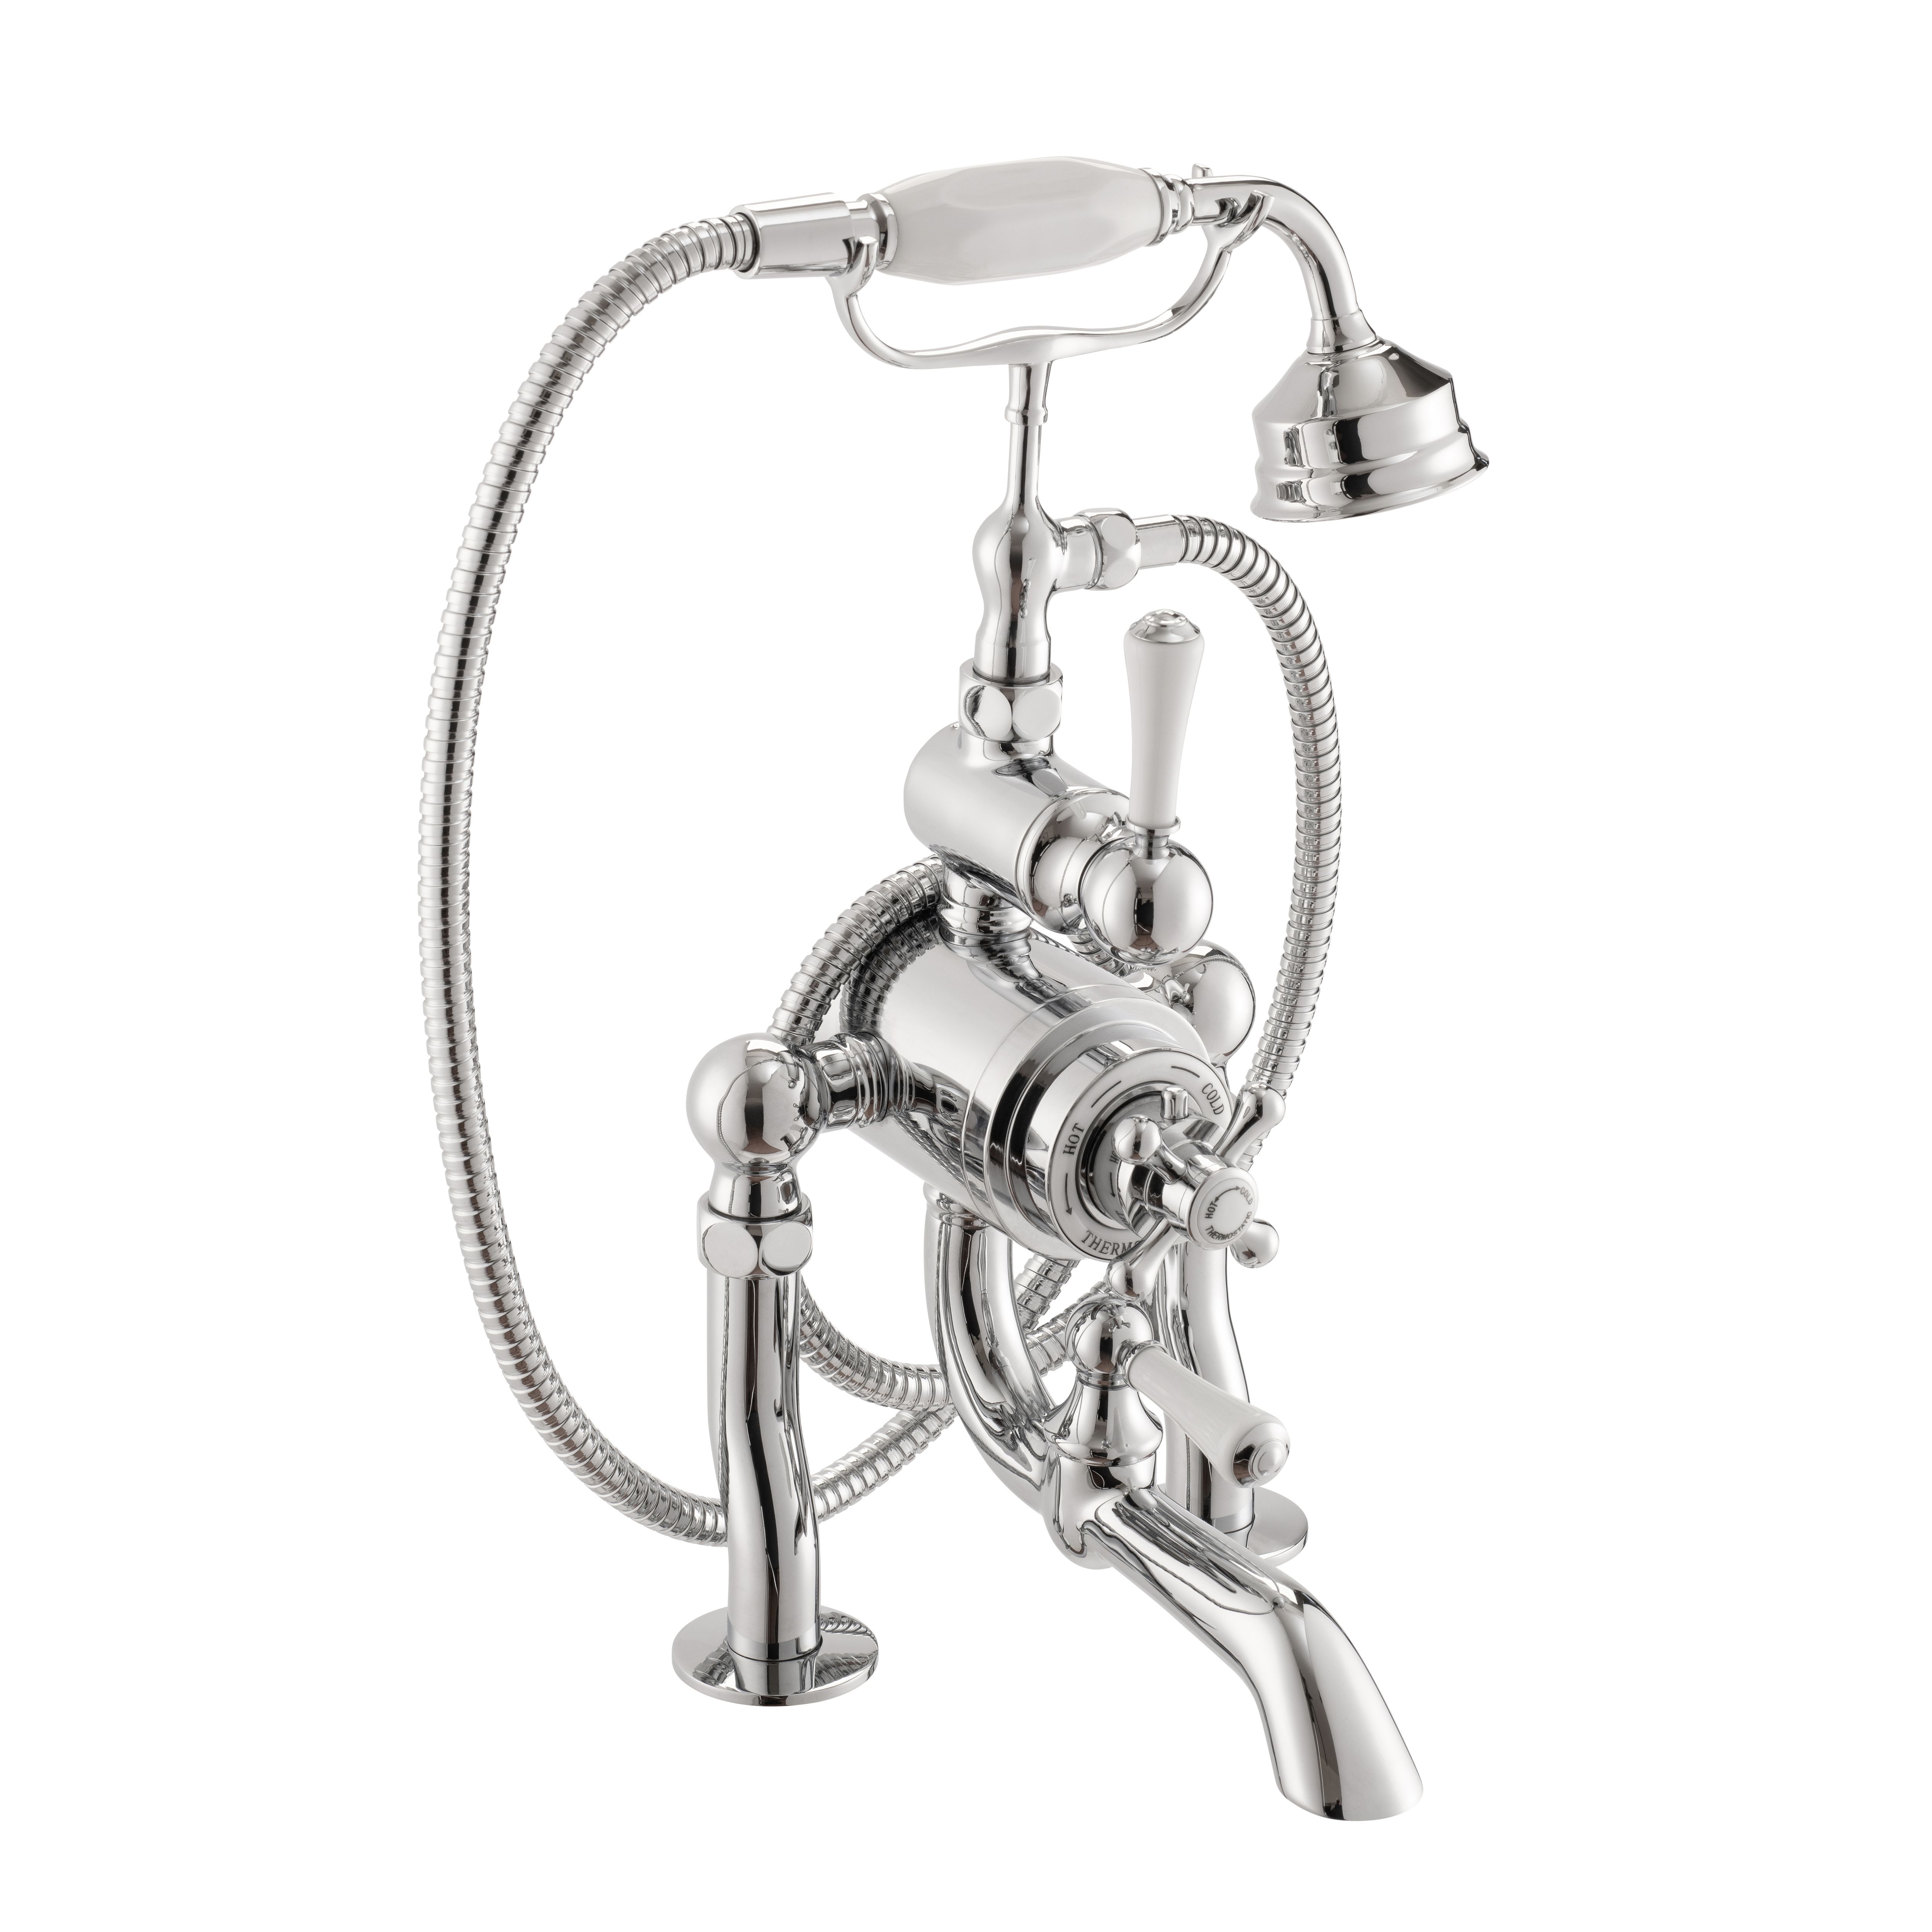 Arroll TRV Chrome effect Surface-mounted Double Mixer Tap with Hand shower